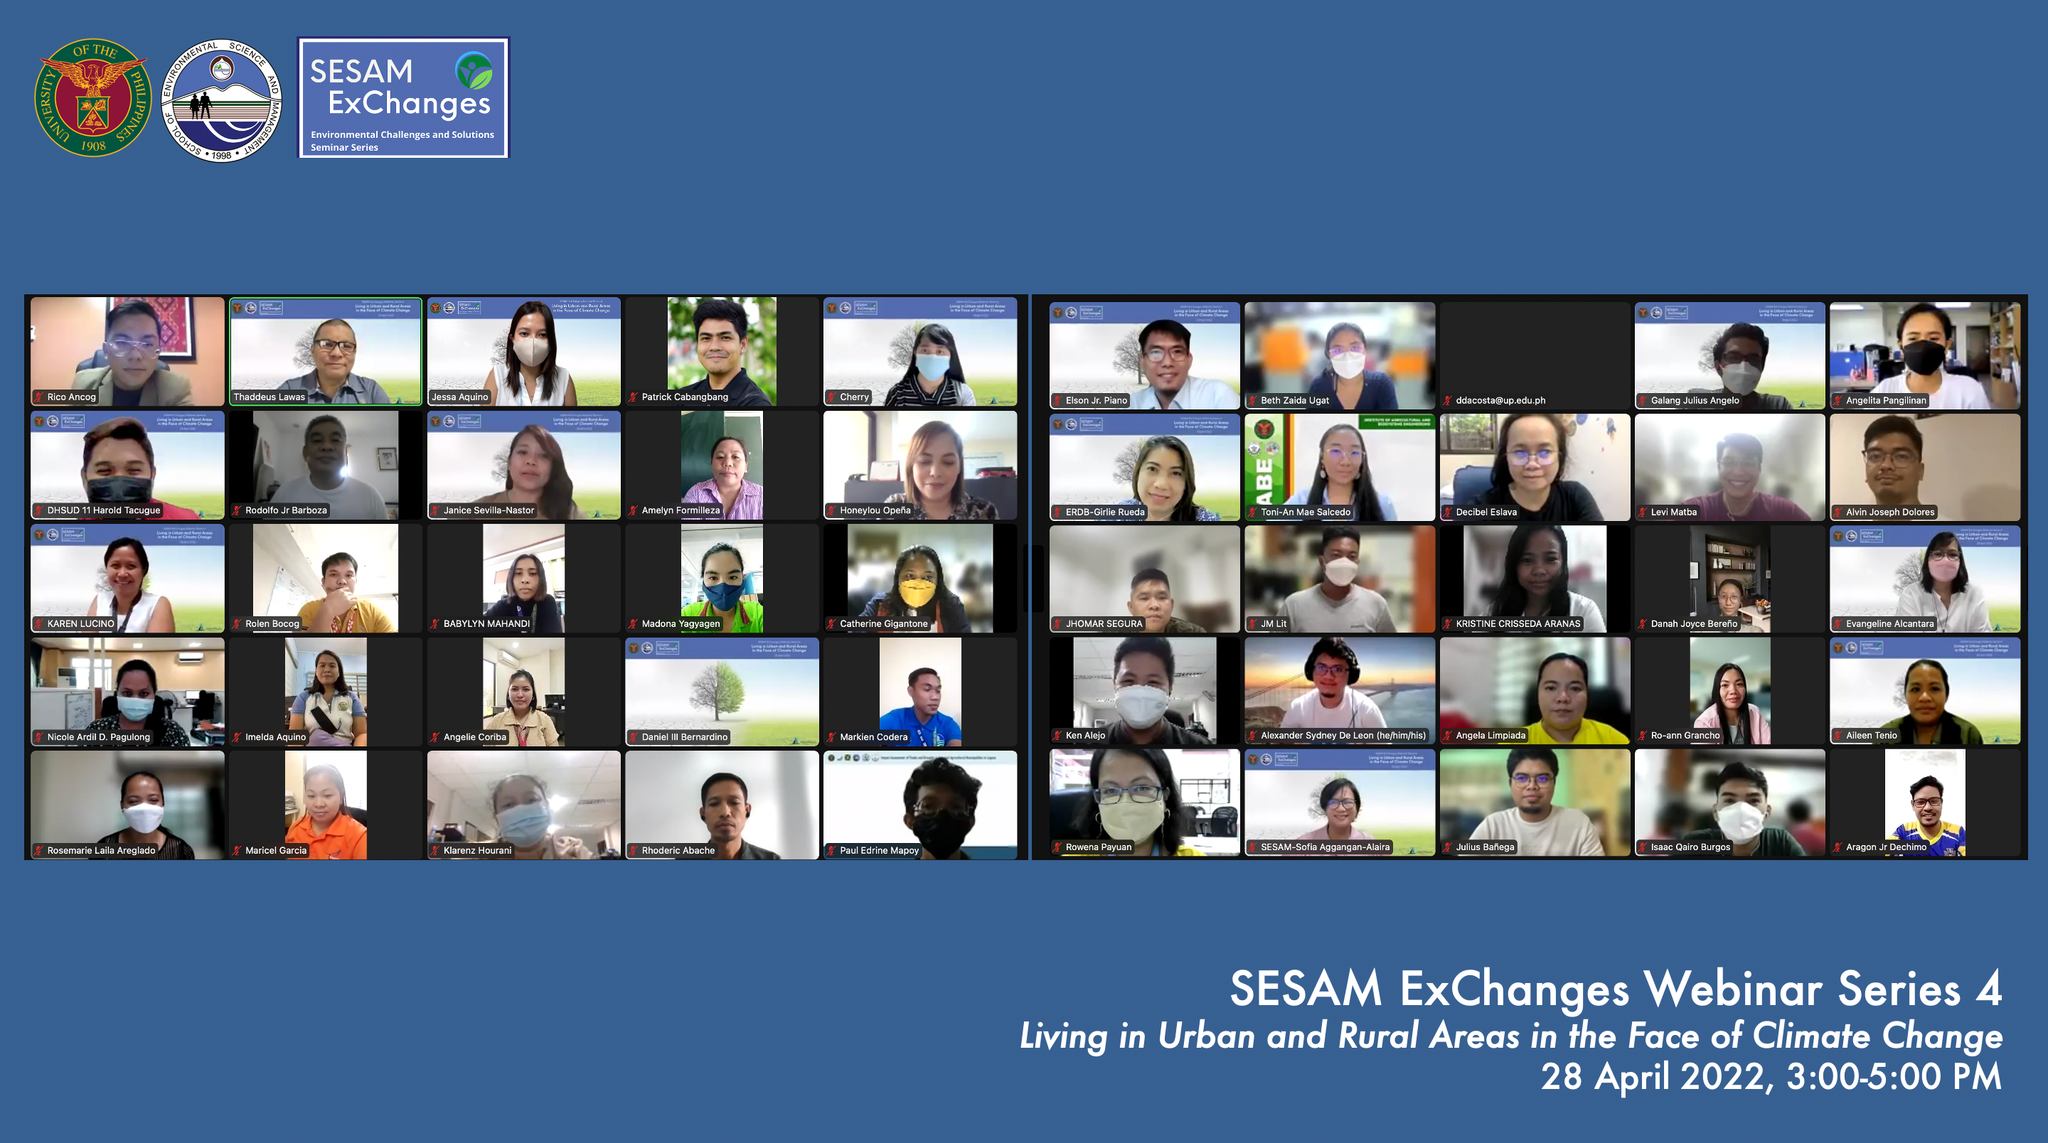 Innovations in the urban and rural areas undergoing climate change adaptation tackled in “SESAM ExChanges”￼